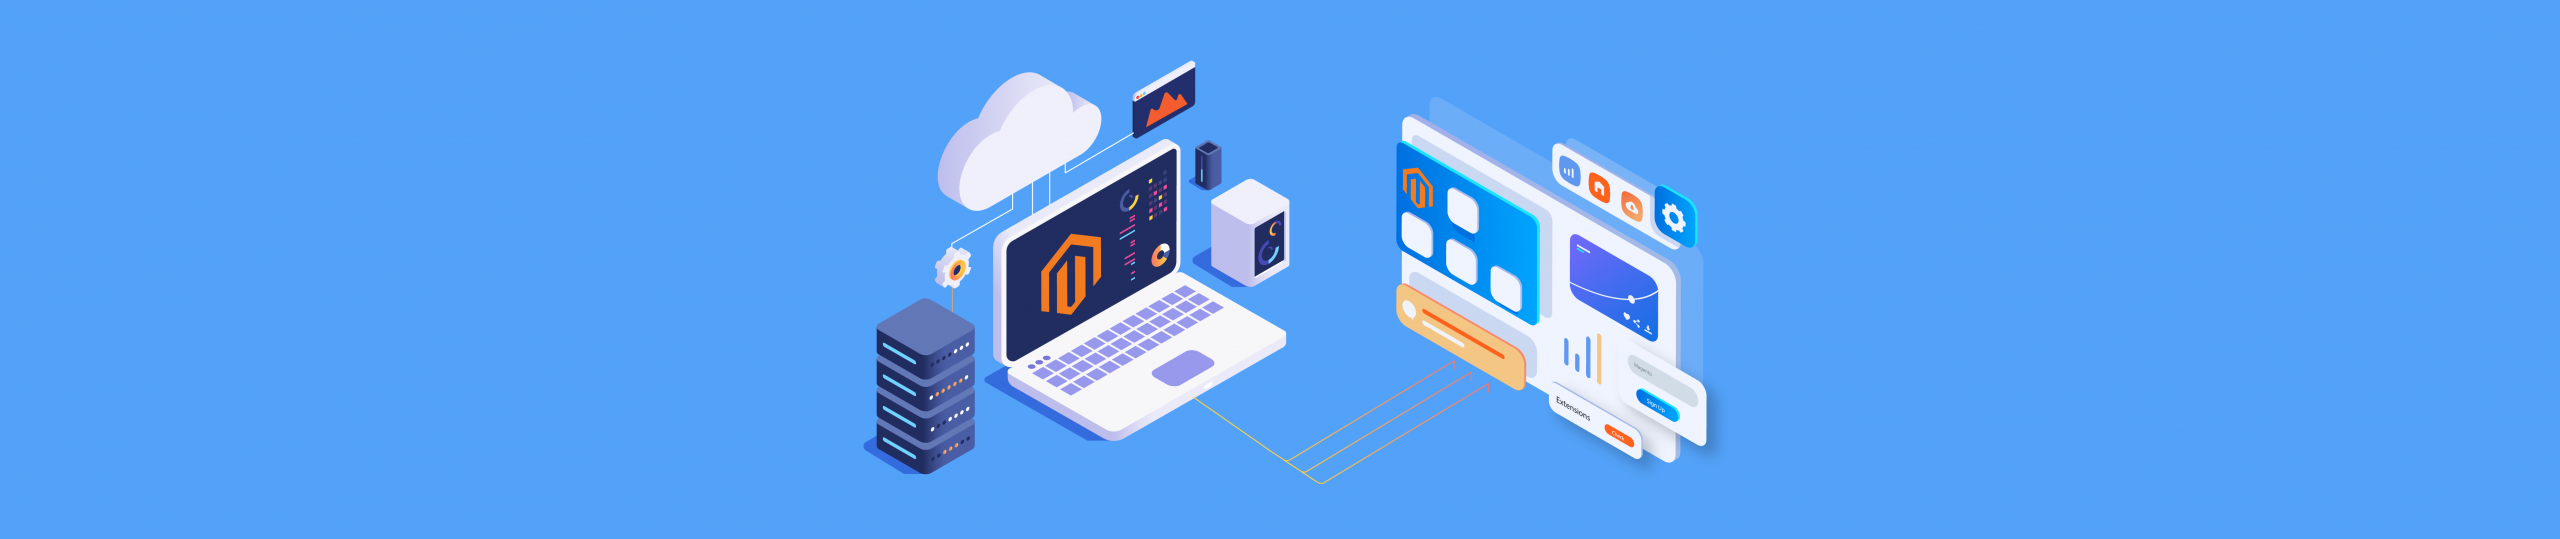 Top 9 Magento Extension Providers in 2021 [Updated]